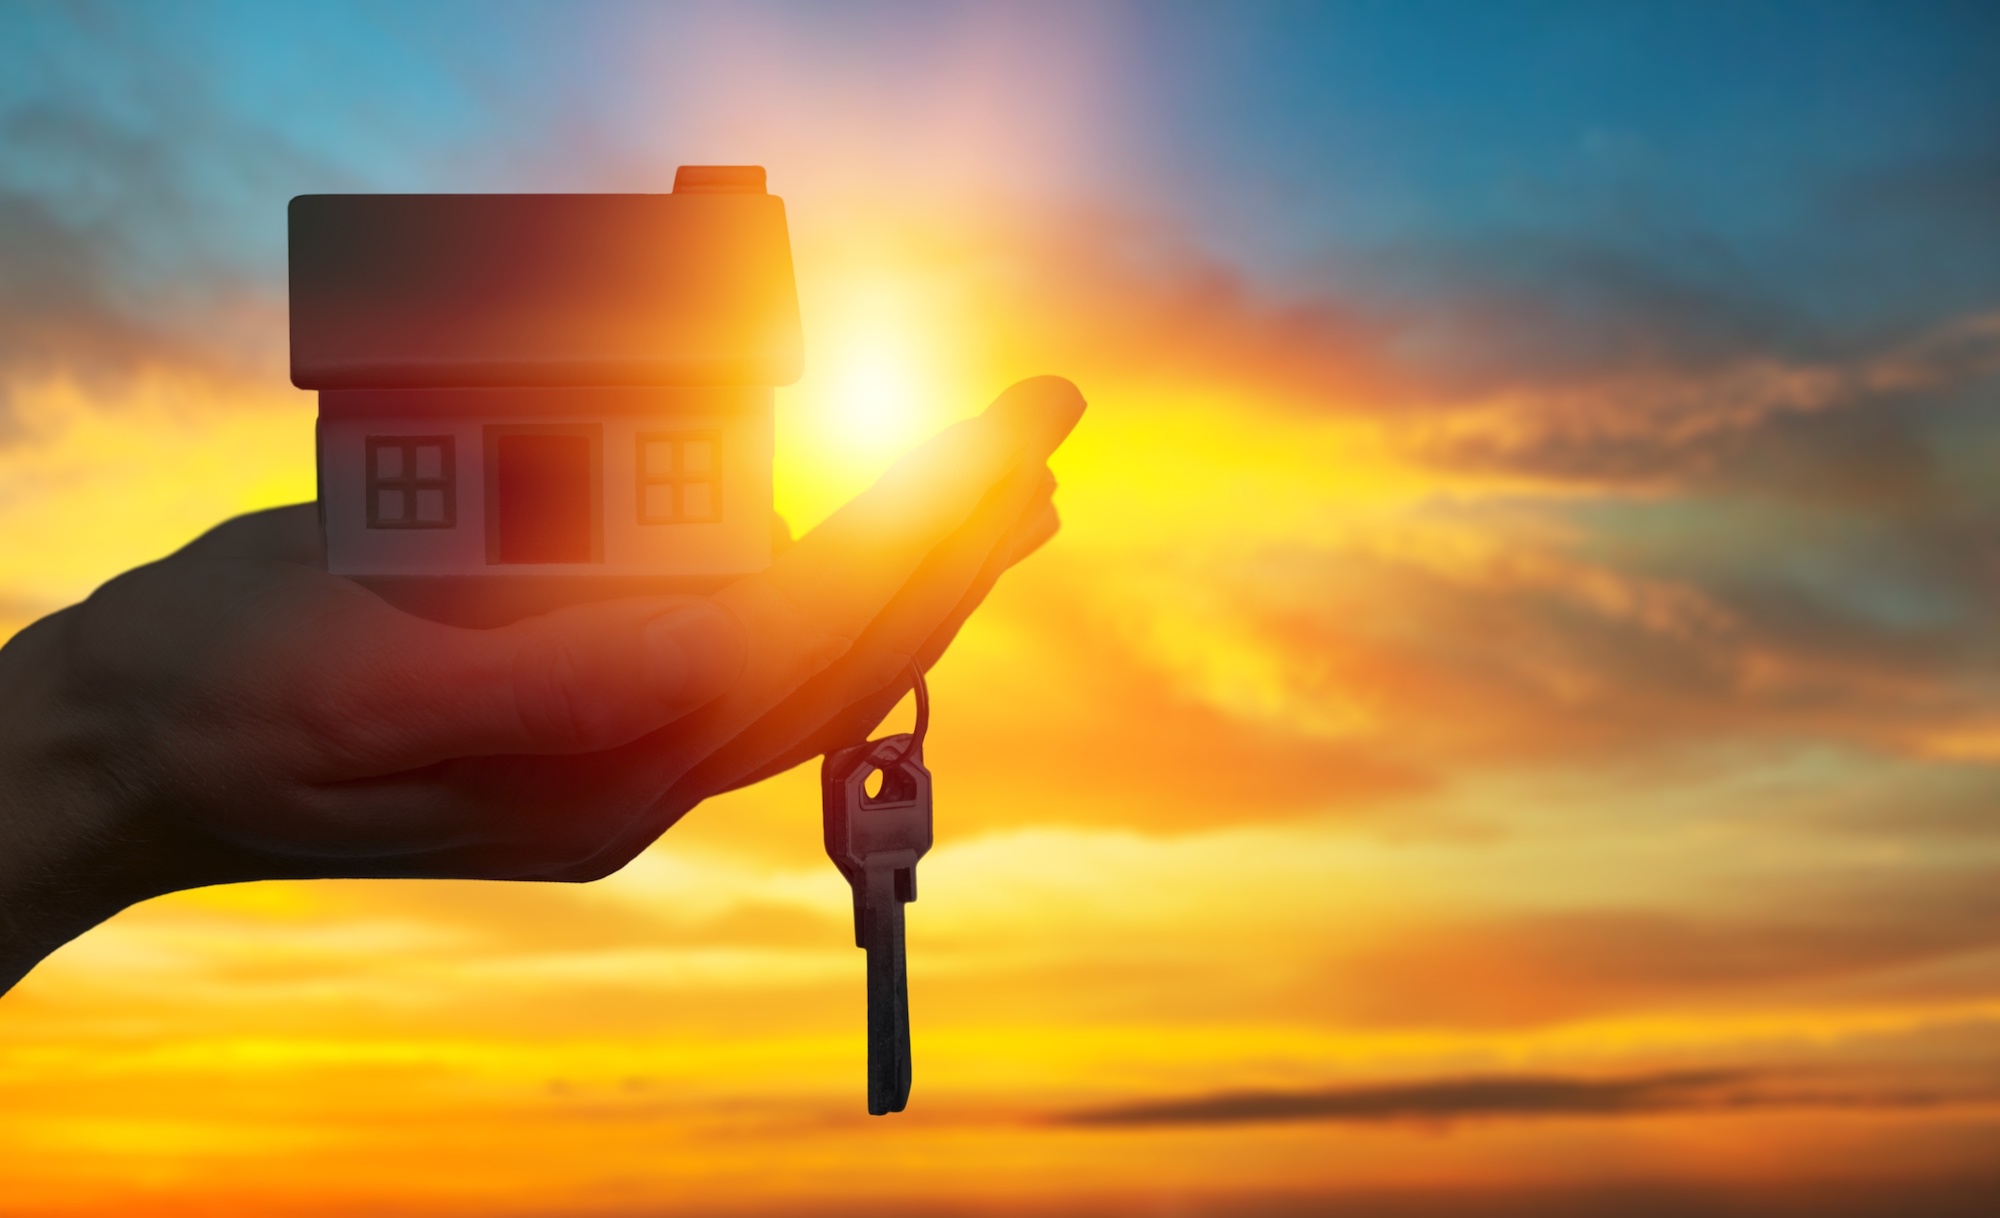 Miniature house model sits in the palm of a hand with keys dangling in front of a sunrise backdrop.